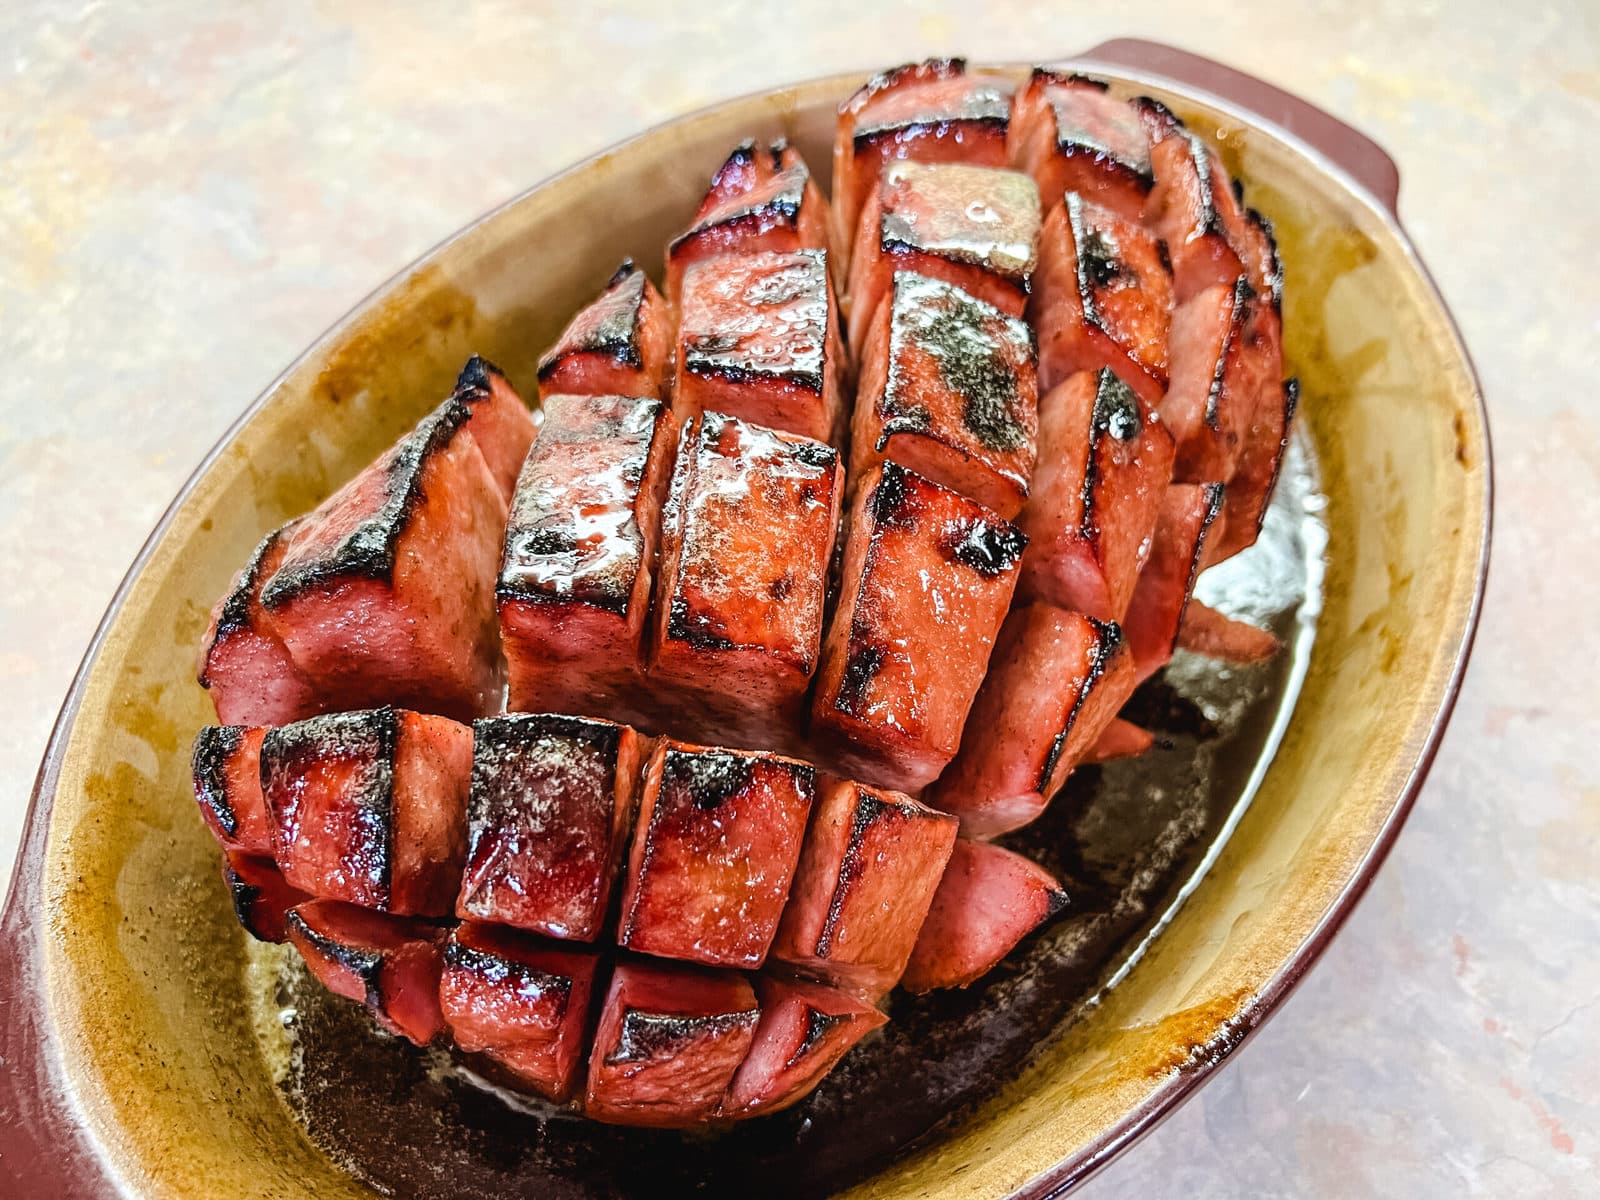 Glazed boneless whole ham that is scored and hot from the oven. 